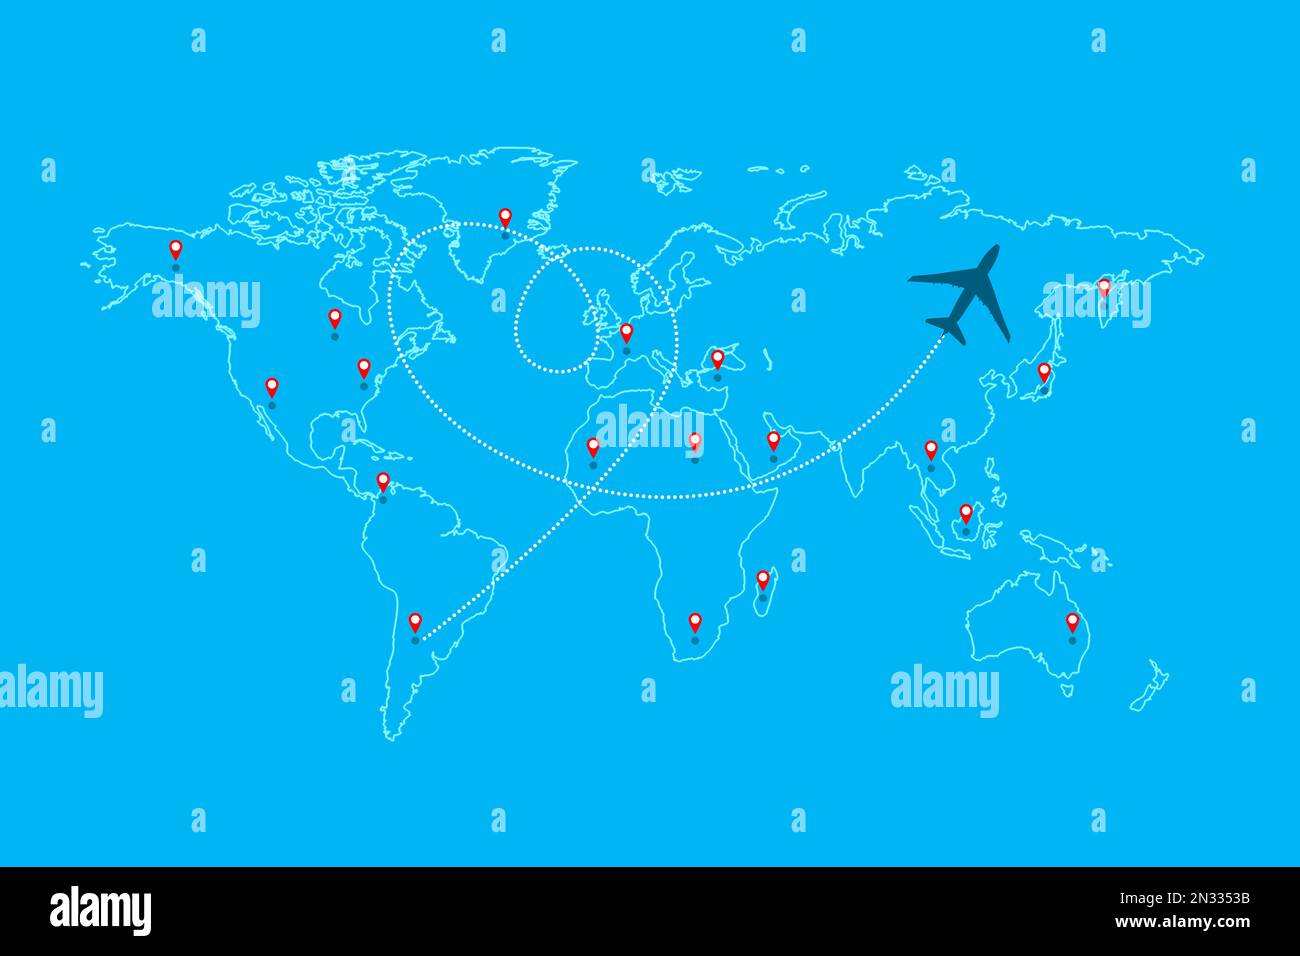 Flight routs map with airplane on it, illustration Stock Photo